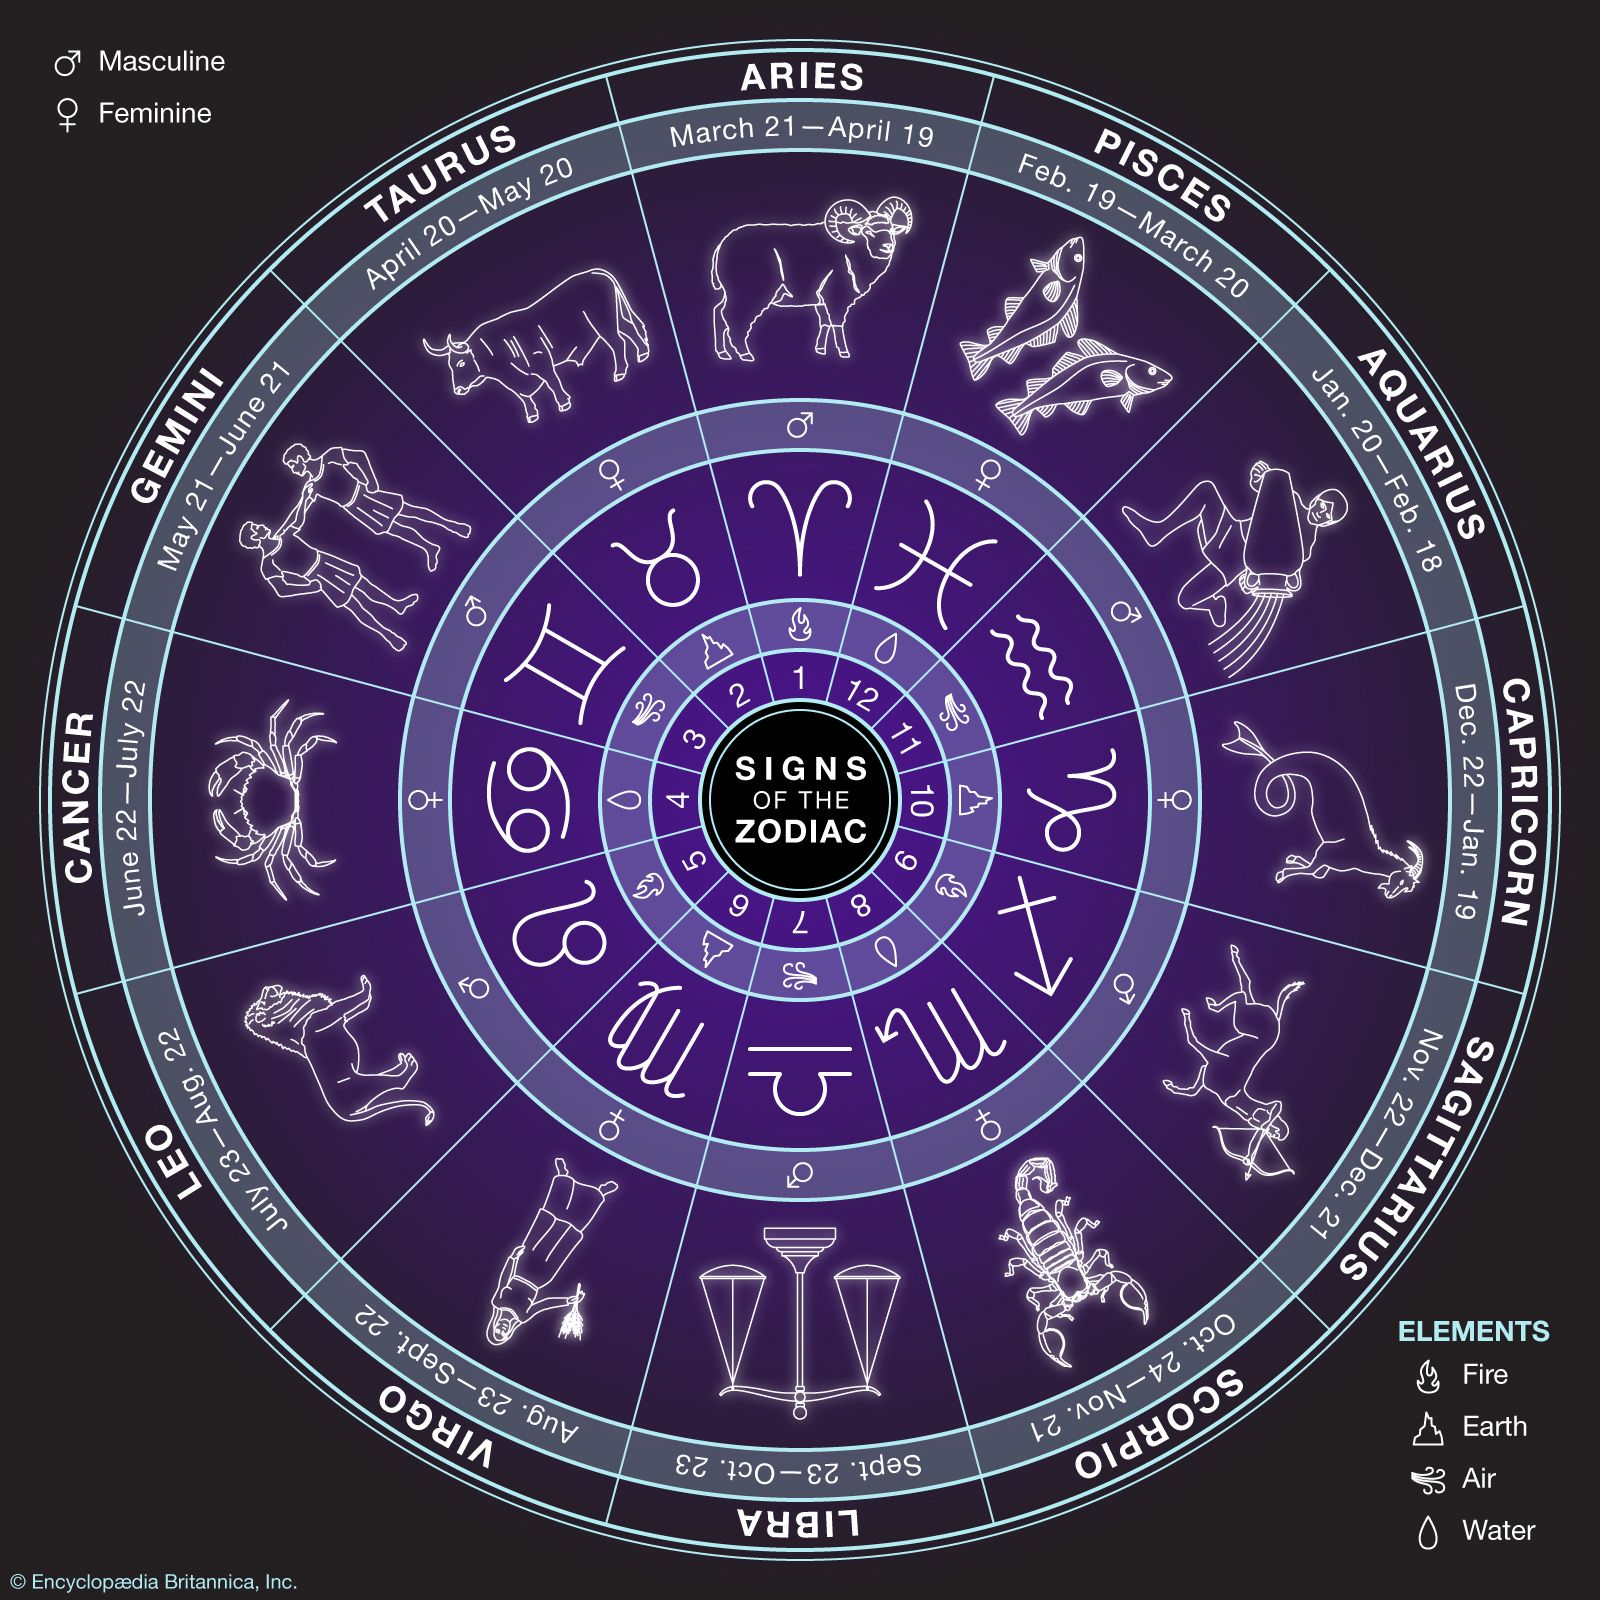 Overview Of The Zodiac System